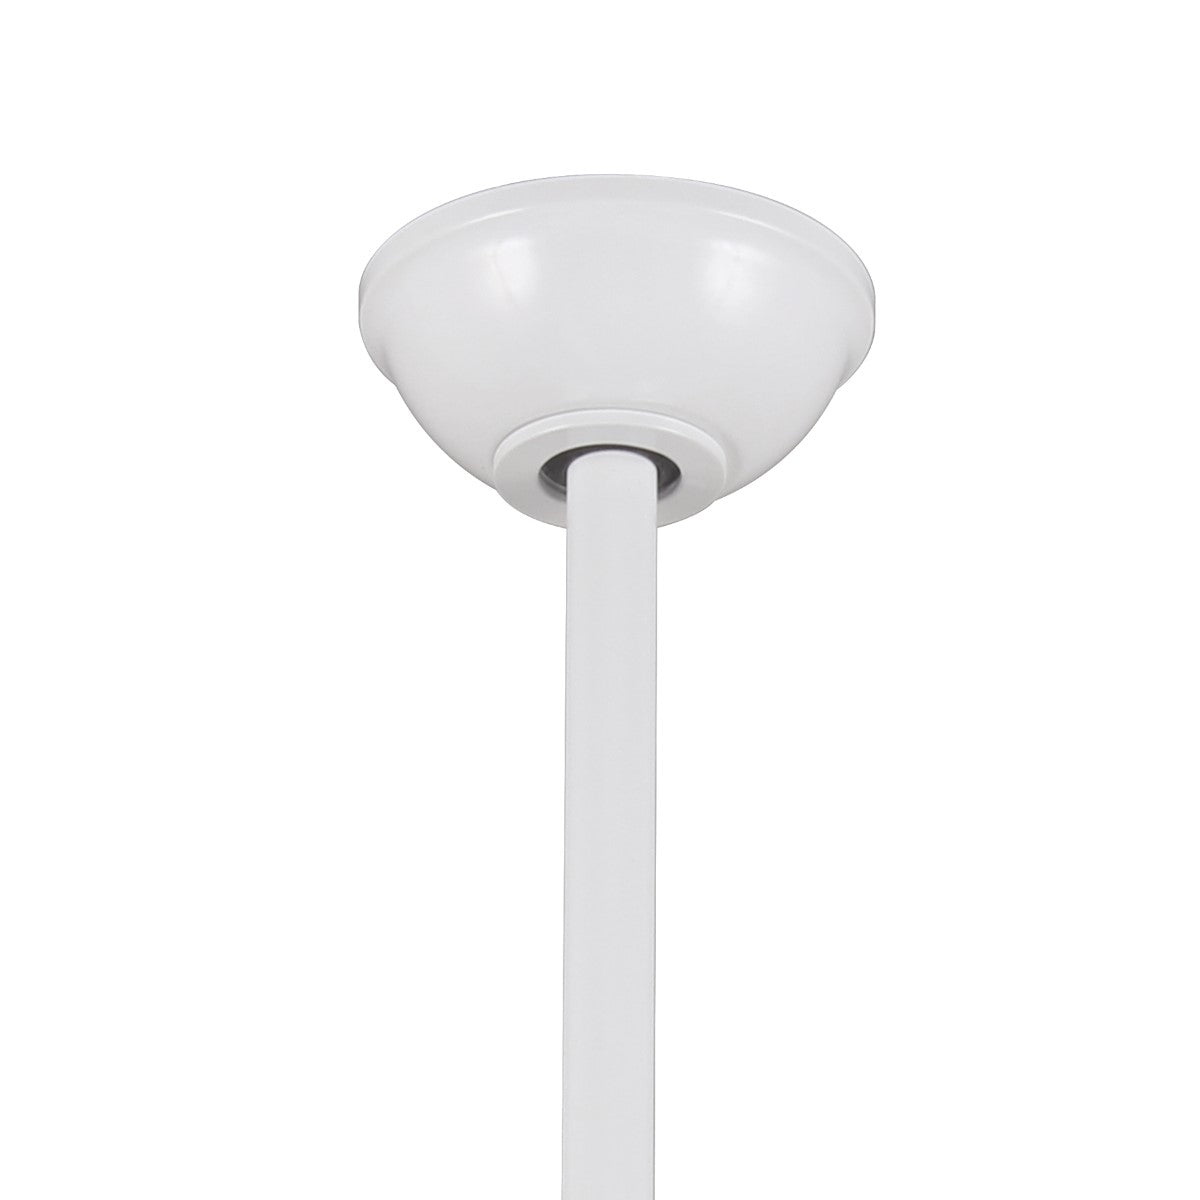 Light Wave 52 Inch Modern Propeller Ceiling Fan With Light And Remote